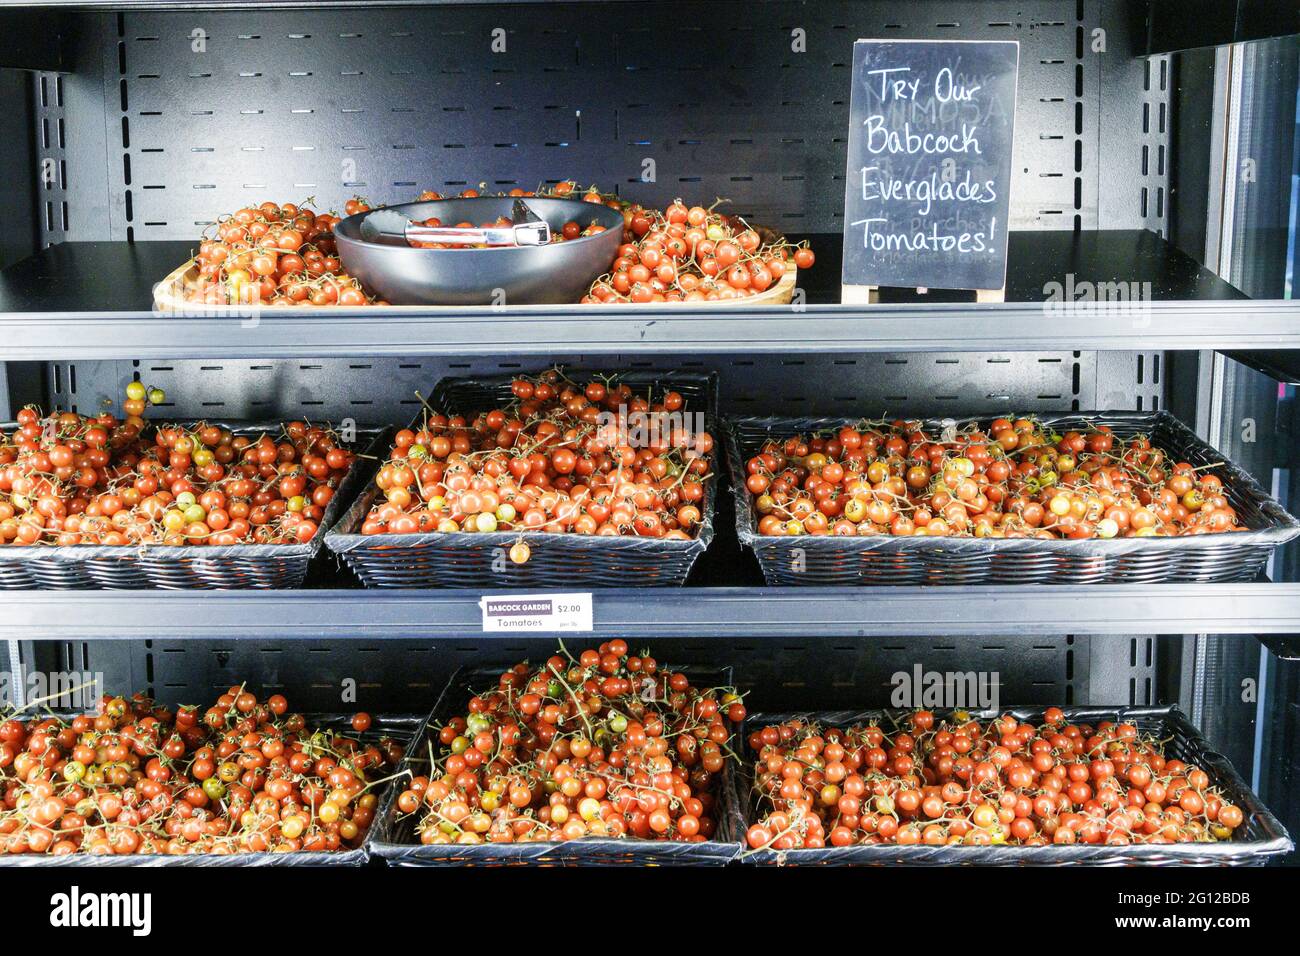 Florida Babcock Ranch planned community solar-powered city Slater’s Goods & Provisions cafe market farm-fresh organic marketplace Everglades tomatoes Stock Photo